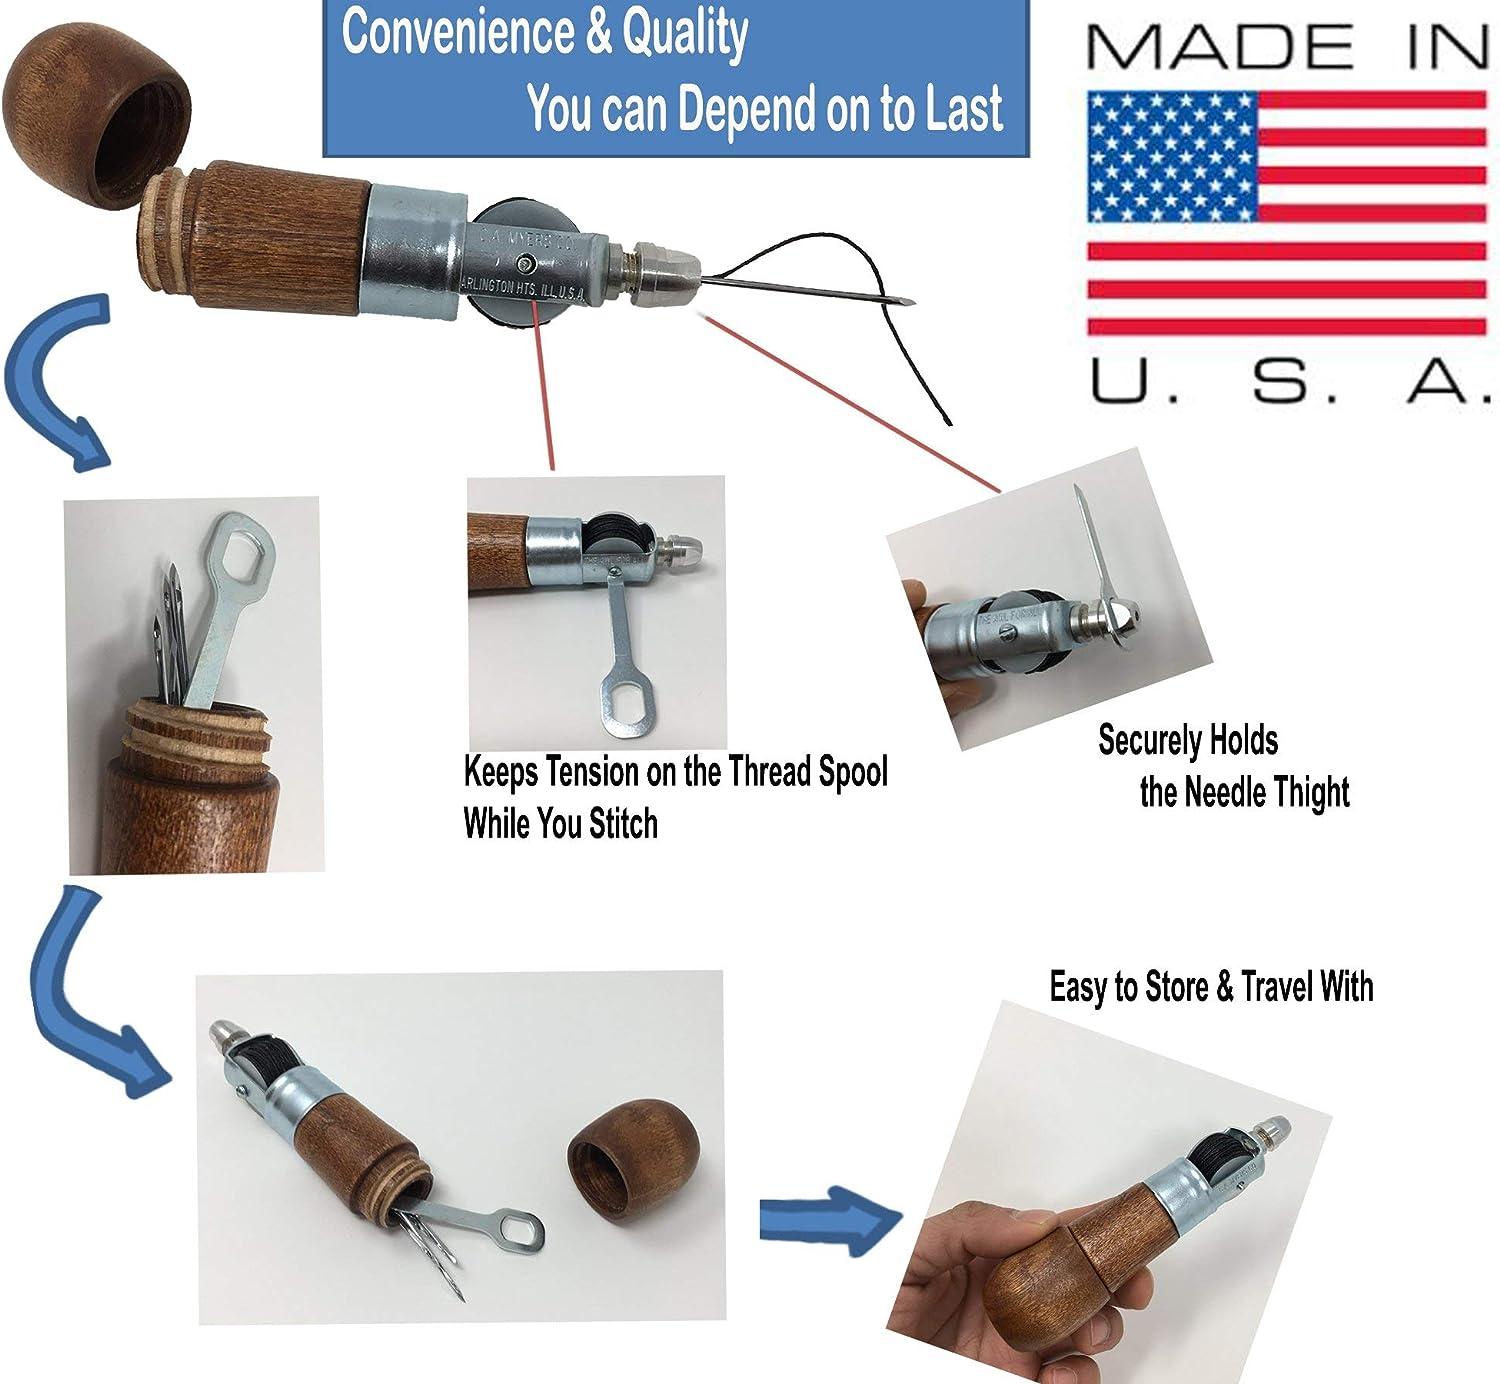 Repair Stitch Tool  Sewing Awl for Bounce Houses Inflatables Tarps Leather  Thick Fabric Shoes Bags Belt Upholstery Repair Kit & Crafts Leather  Stitching - MADE IN USA PROFESSIONAL HEAVY DUT